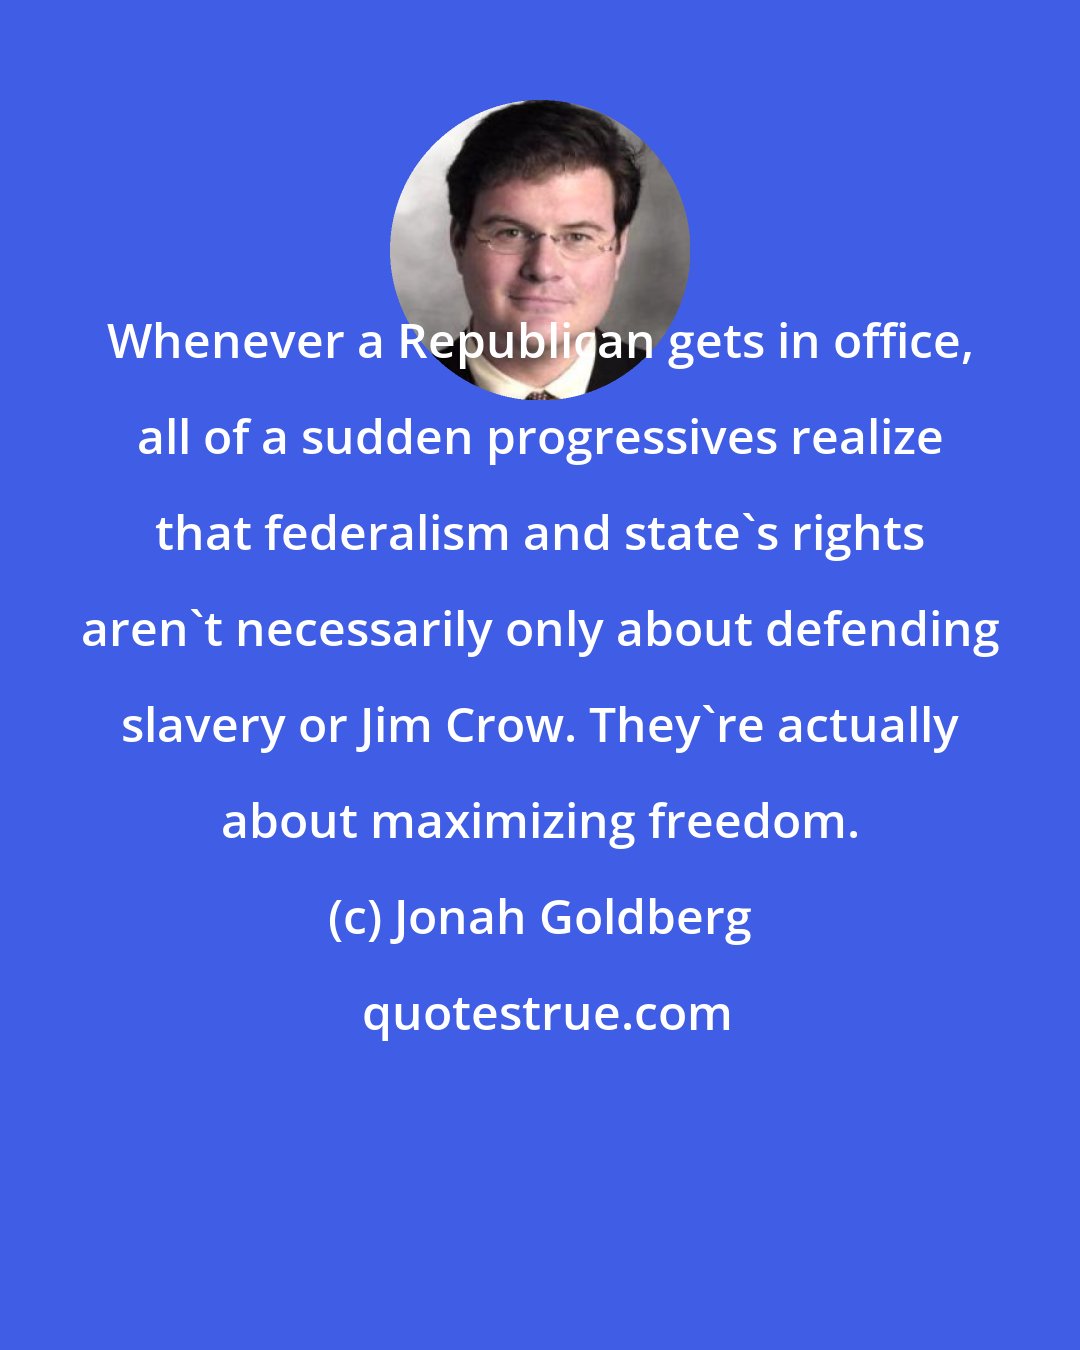 Jonah Goldberg: Whenever a Republican gets in office, all of a sudden progressives realize that federalism and state's rights aren't necessarily only about defending slavery or Jim Crow. They're actually about maximizing freedom.